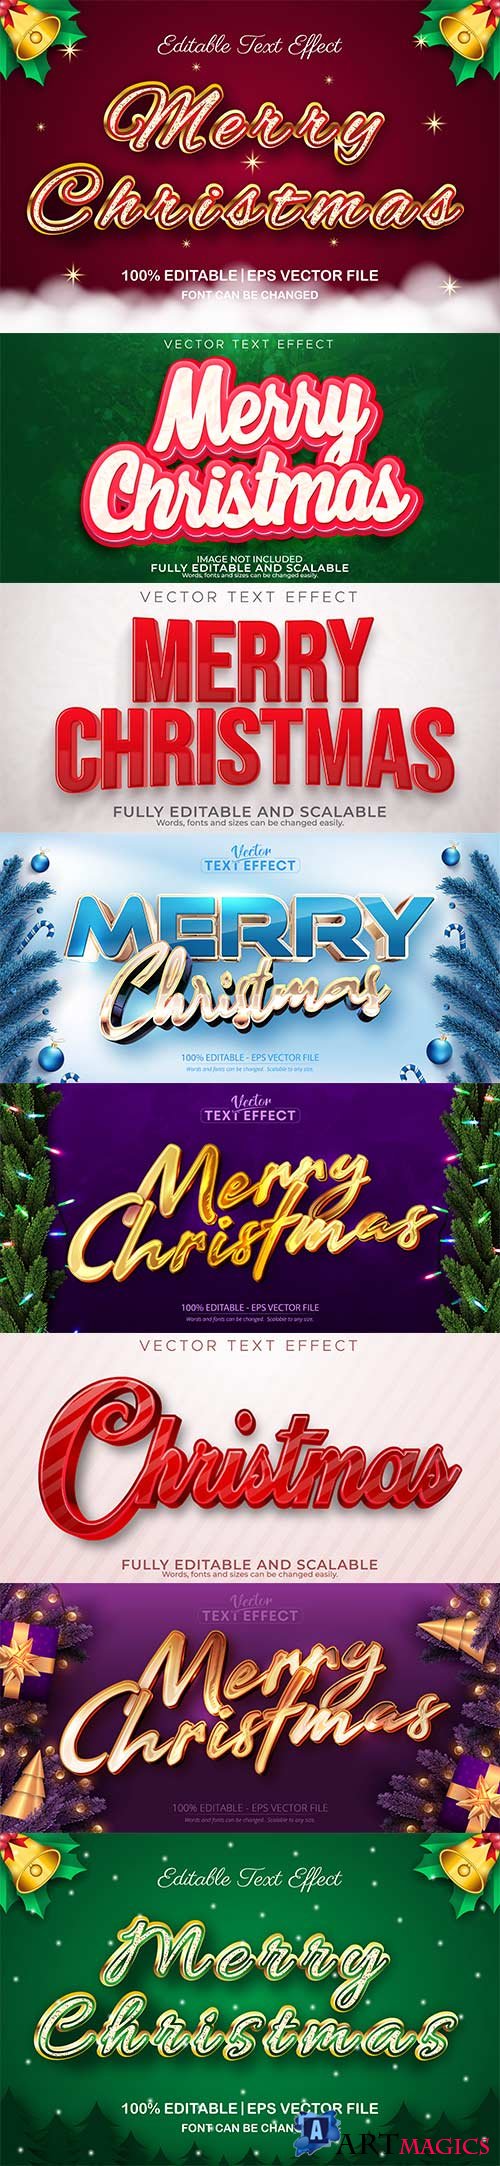 2022 New year and christmas editable text effect vector vol 32